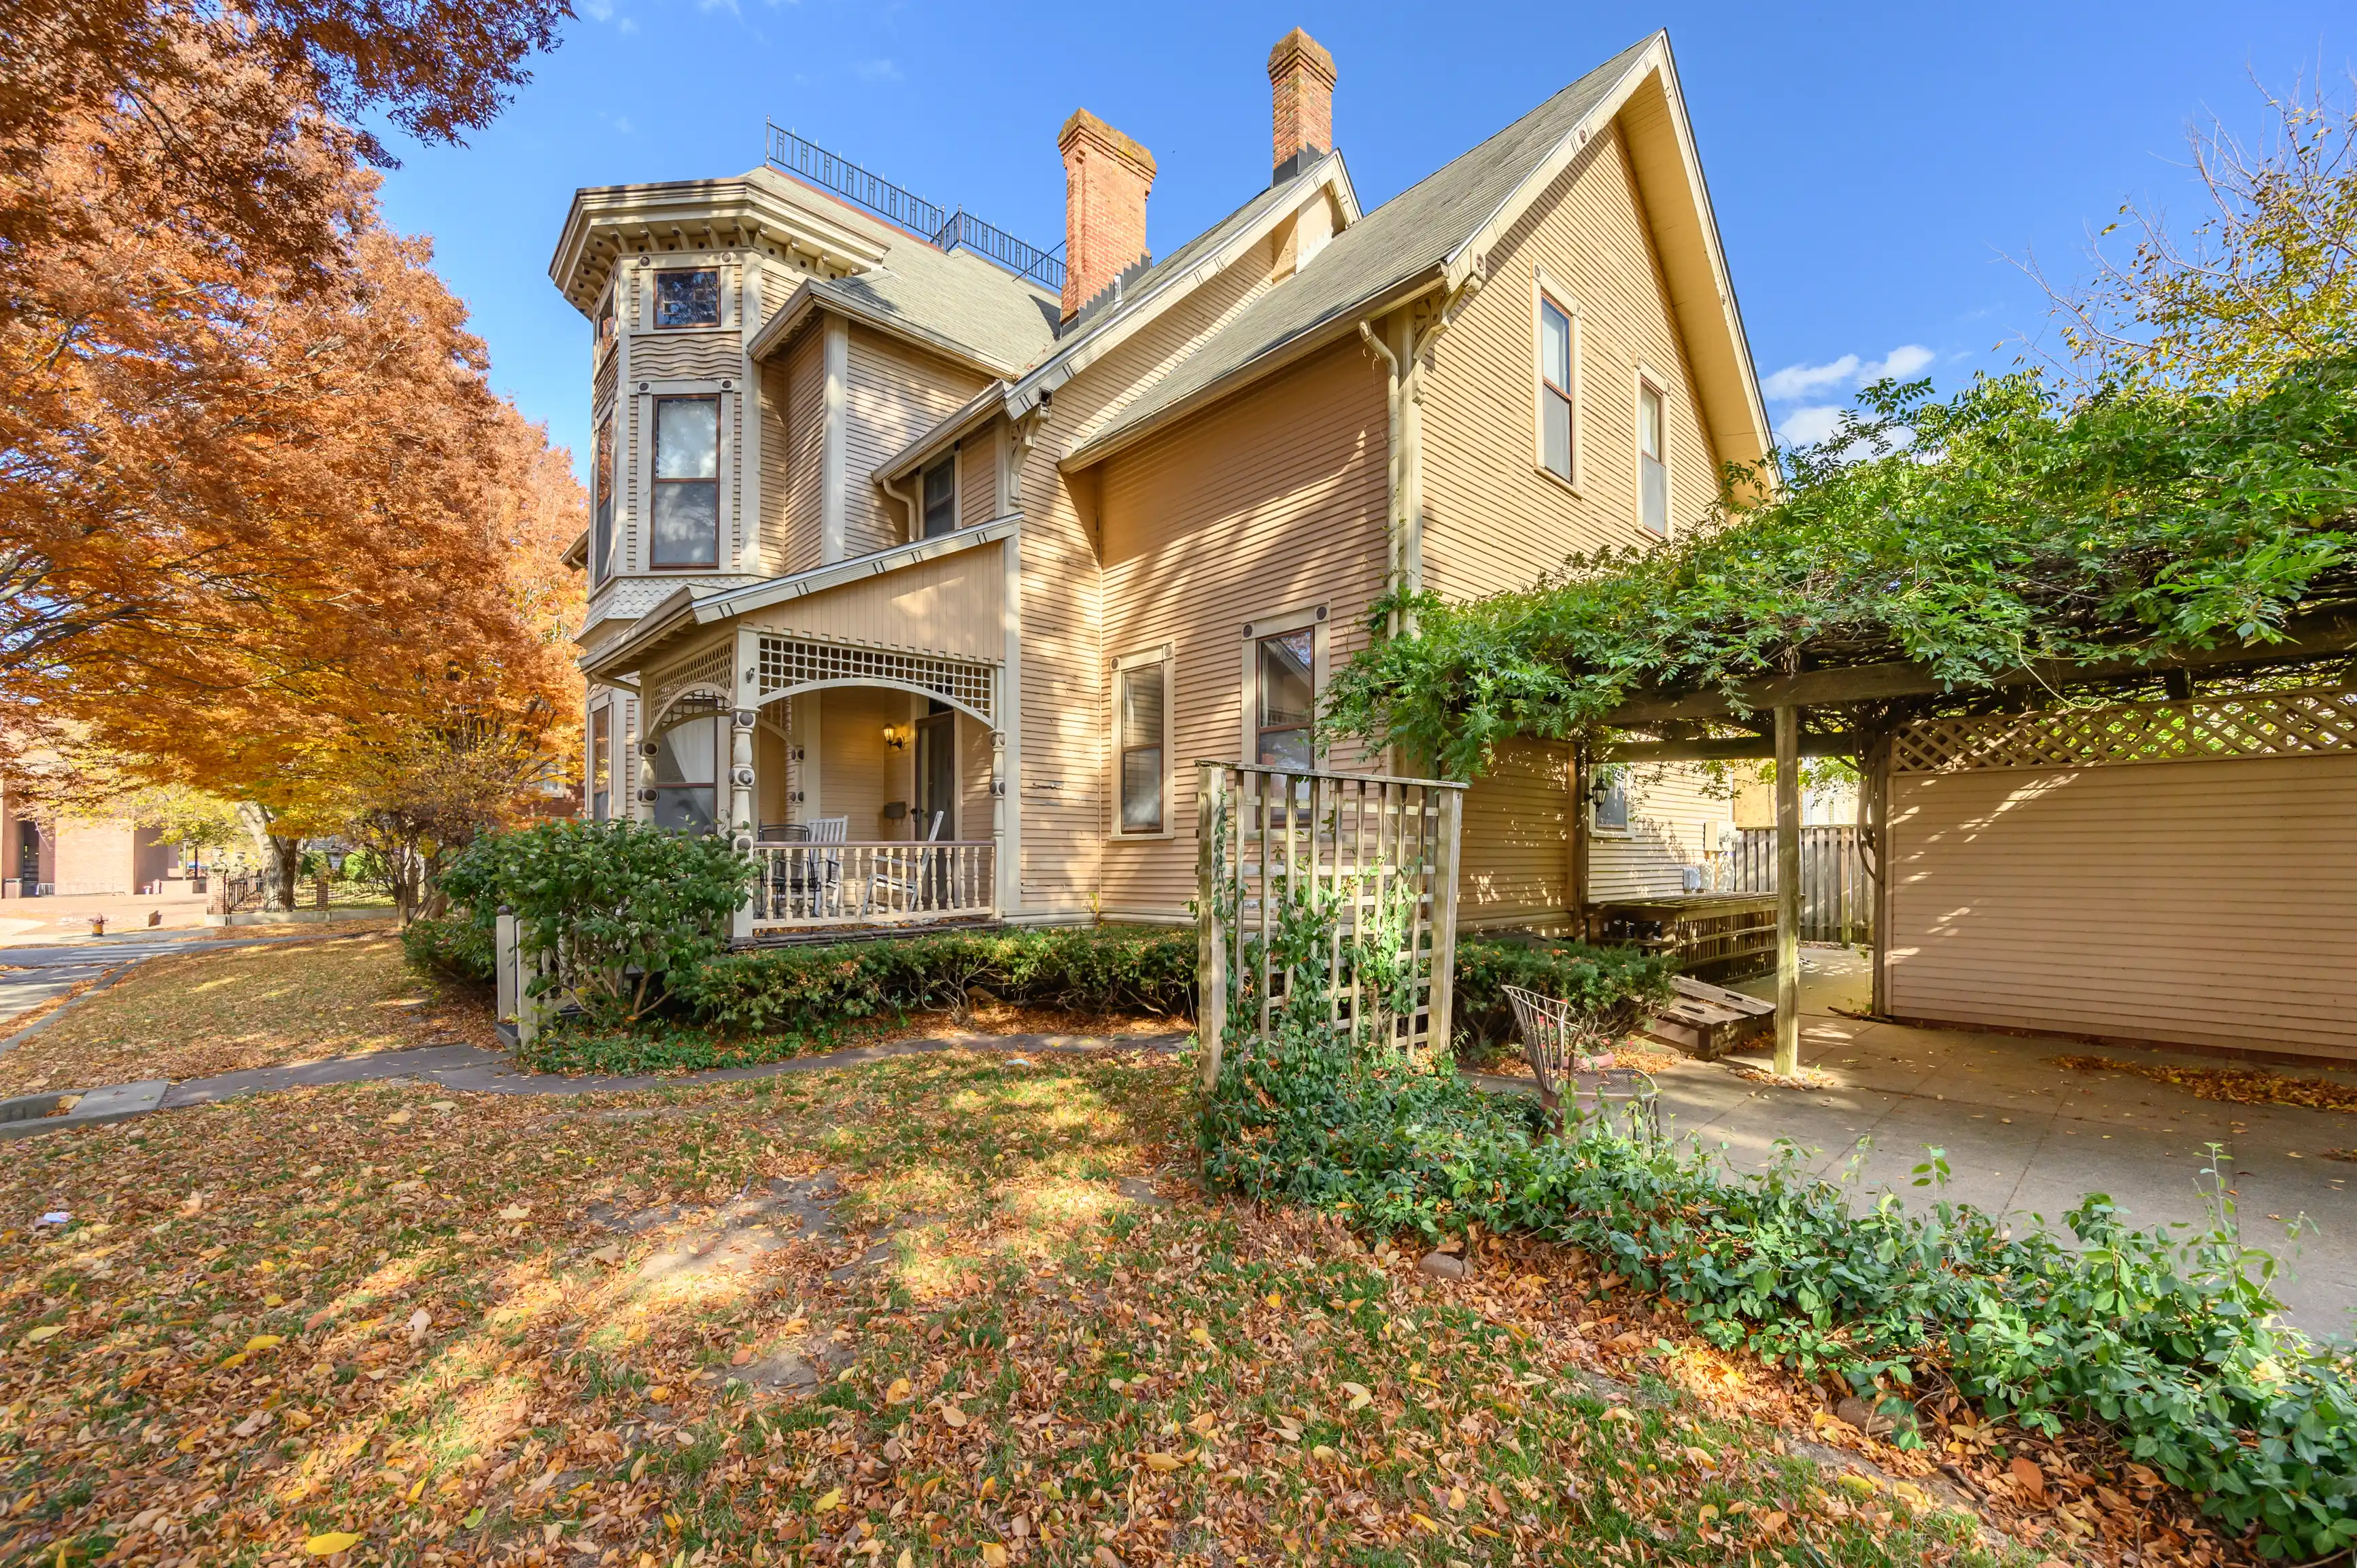 Victorian-style house with a covered porch and a carport surrounded by fallen autumn leaves.